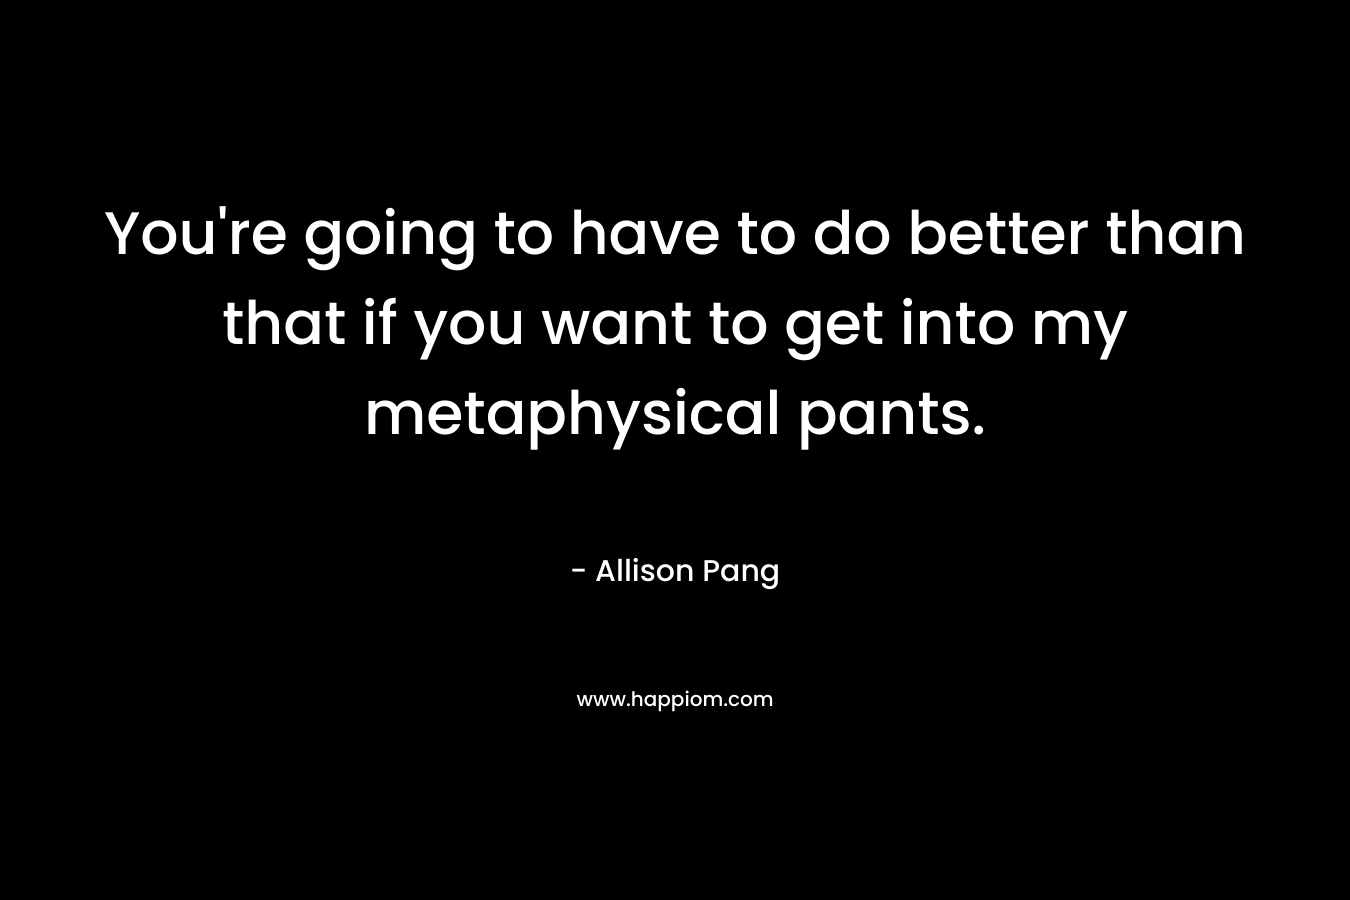 You're going to have to do better than that if you want to get into my metaphysical pants.